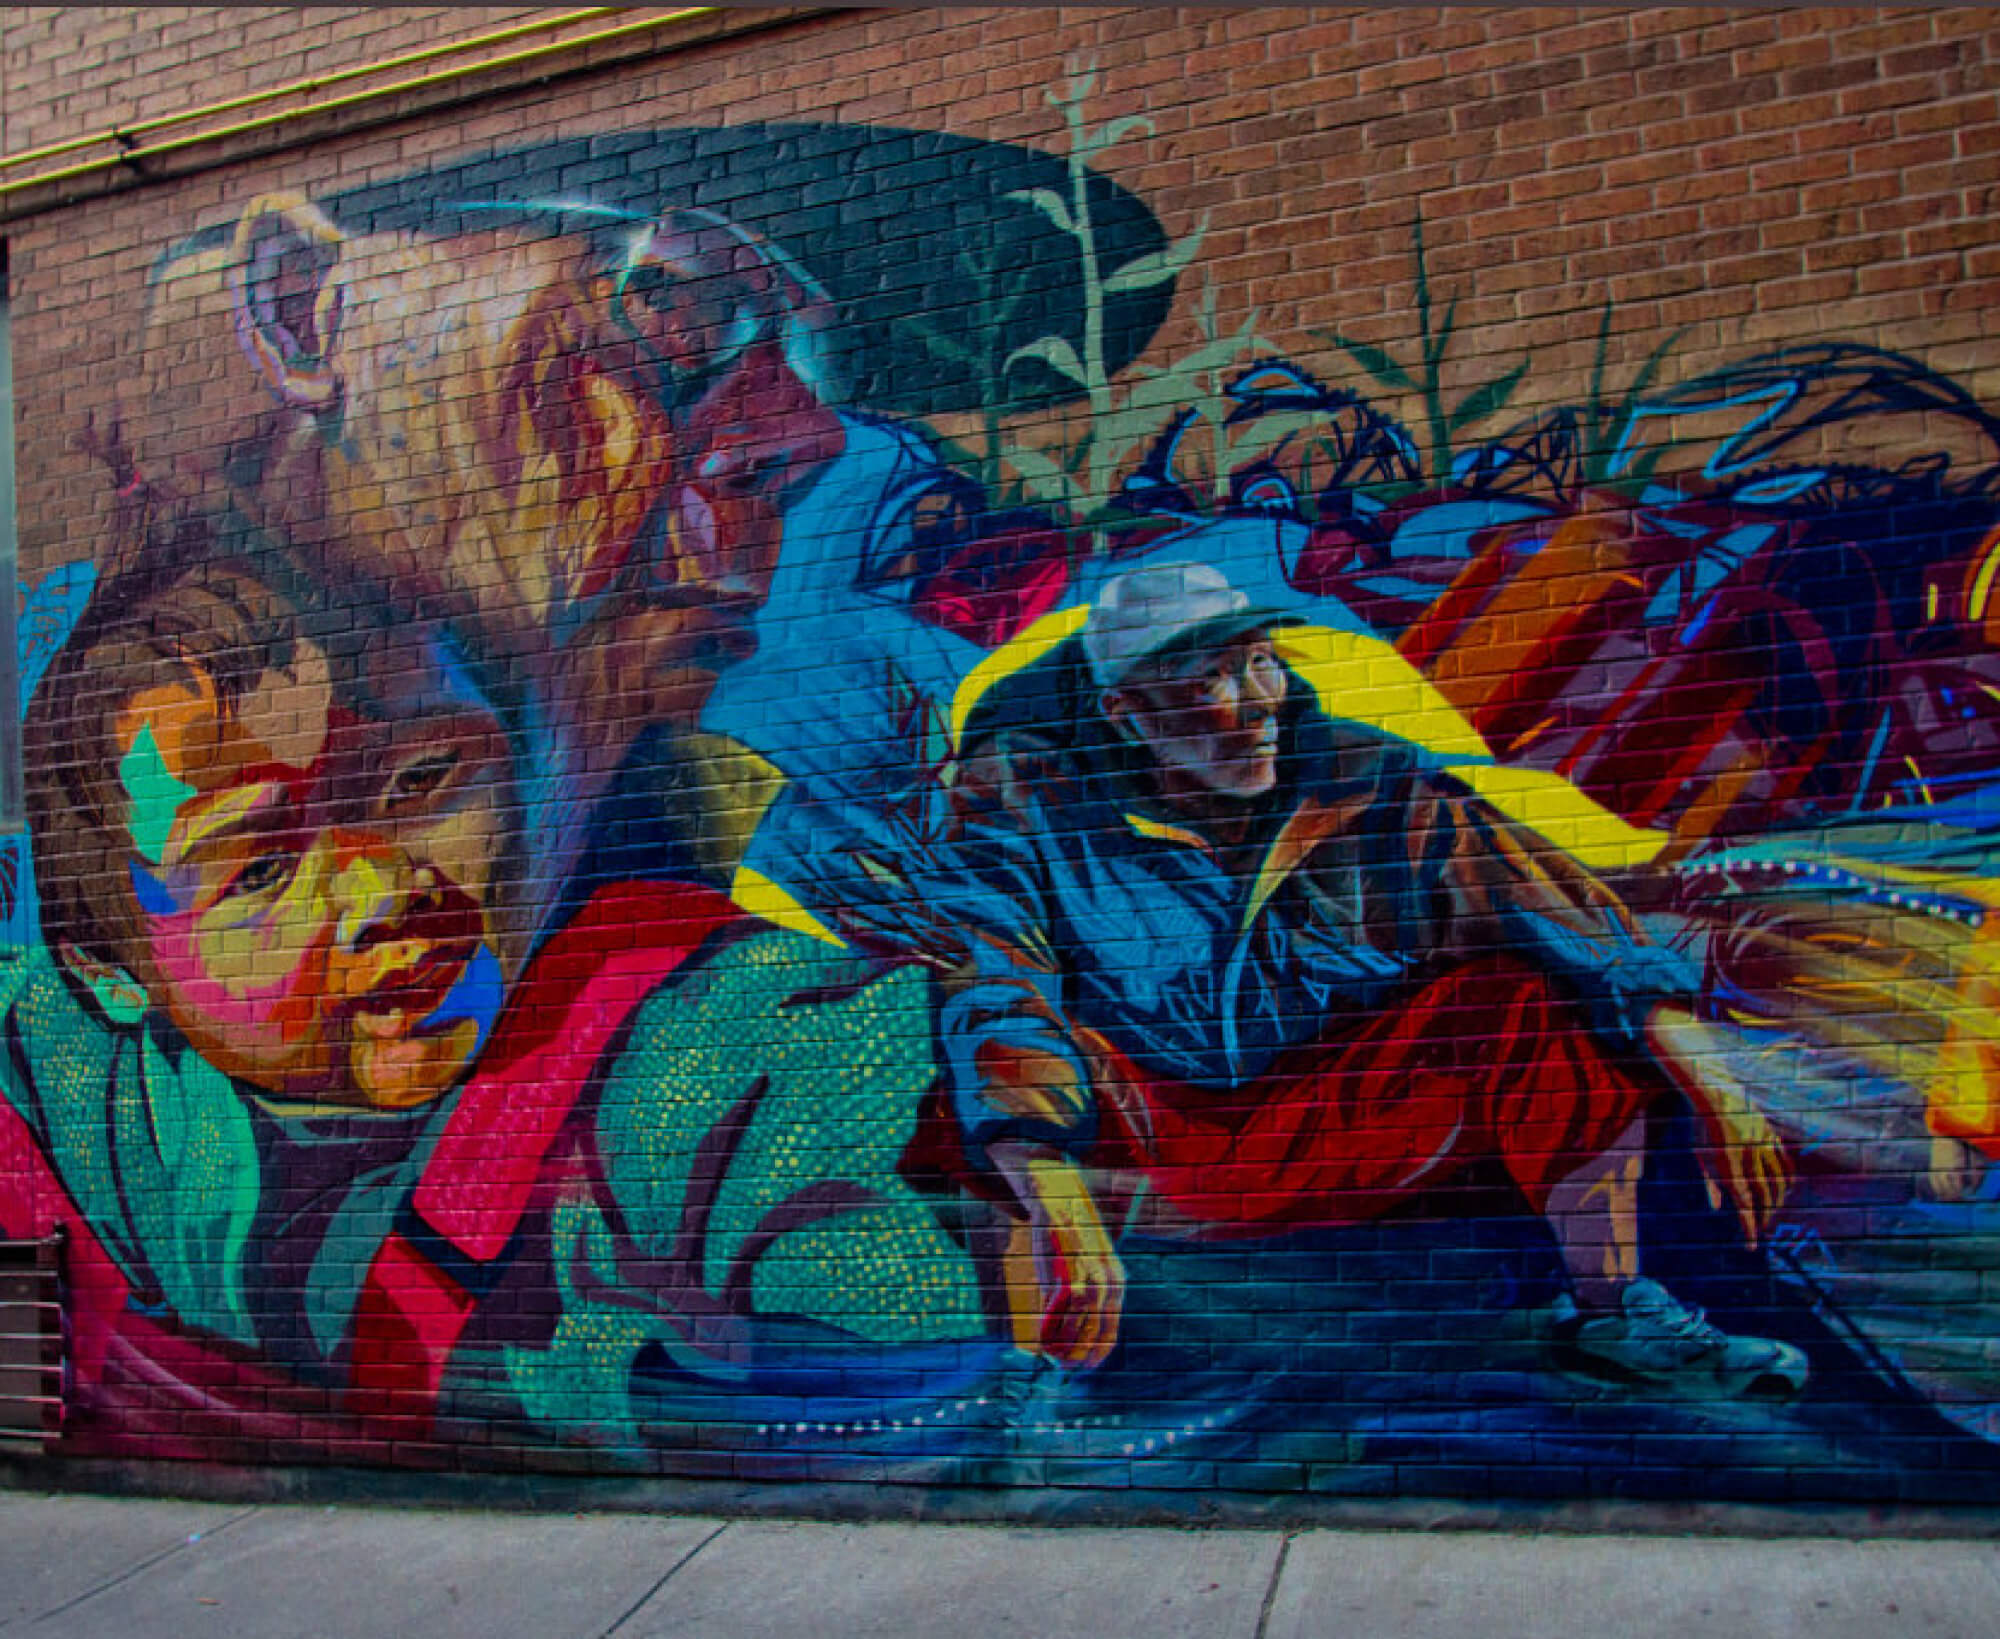 Colourful mural depicting a baby in a carrier in the foreground with two men wearing caps in the background, one is squatting. Vegetal motifs complete the vibrant mural.